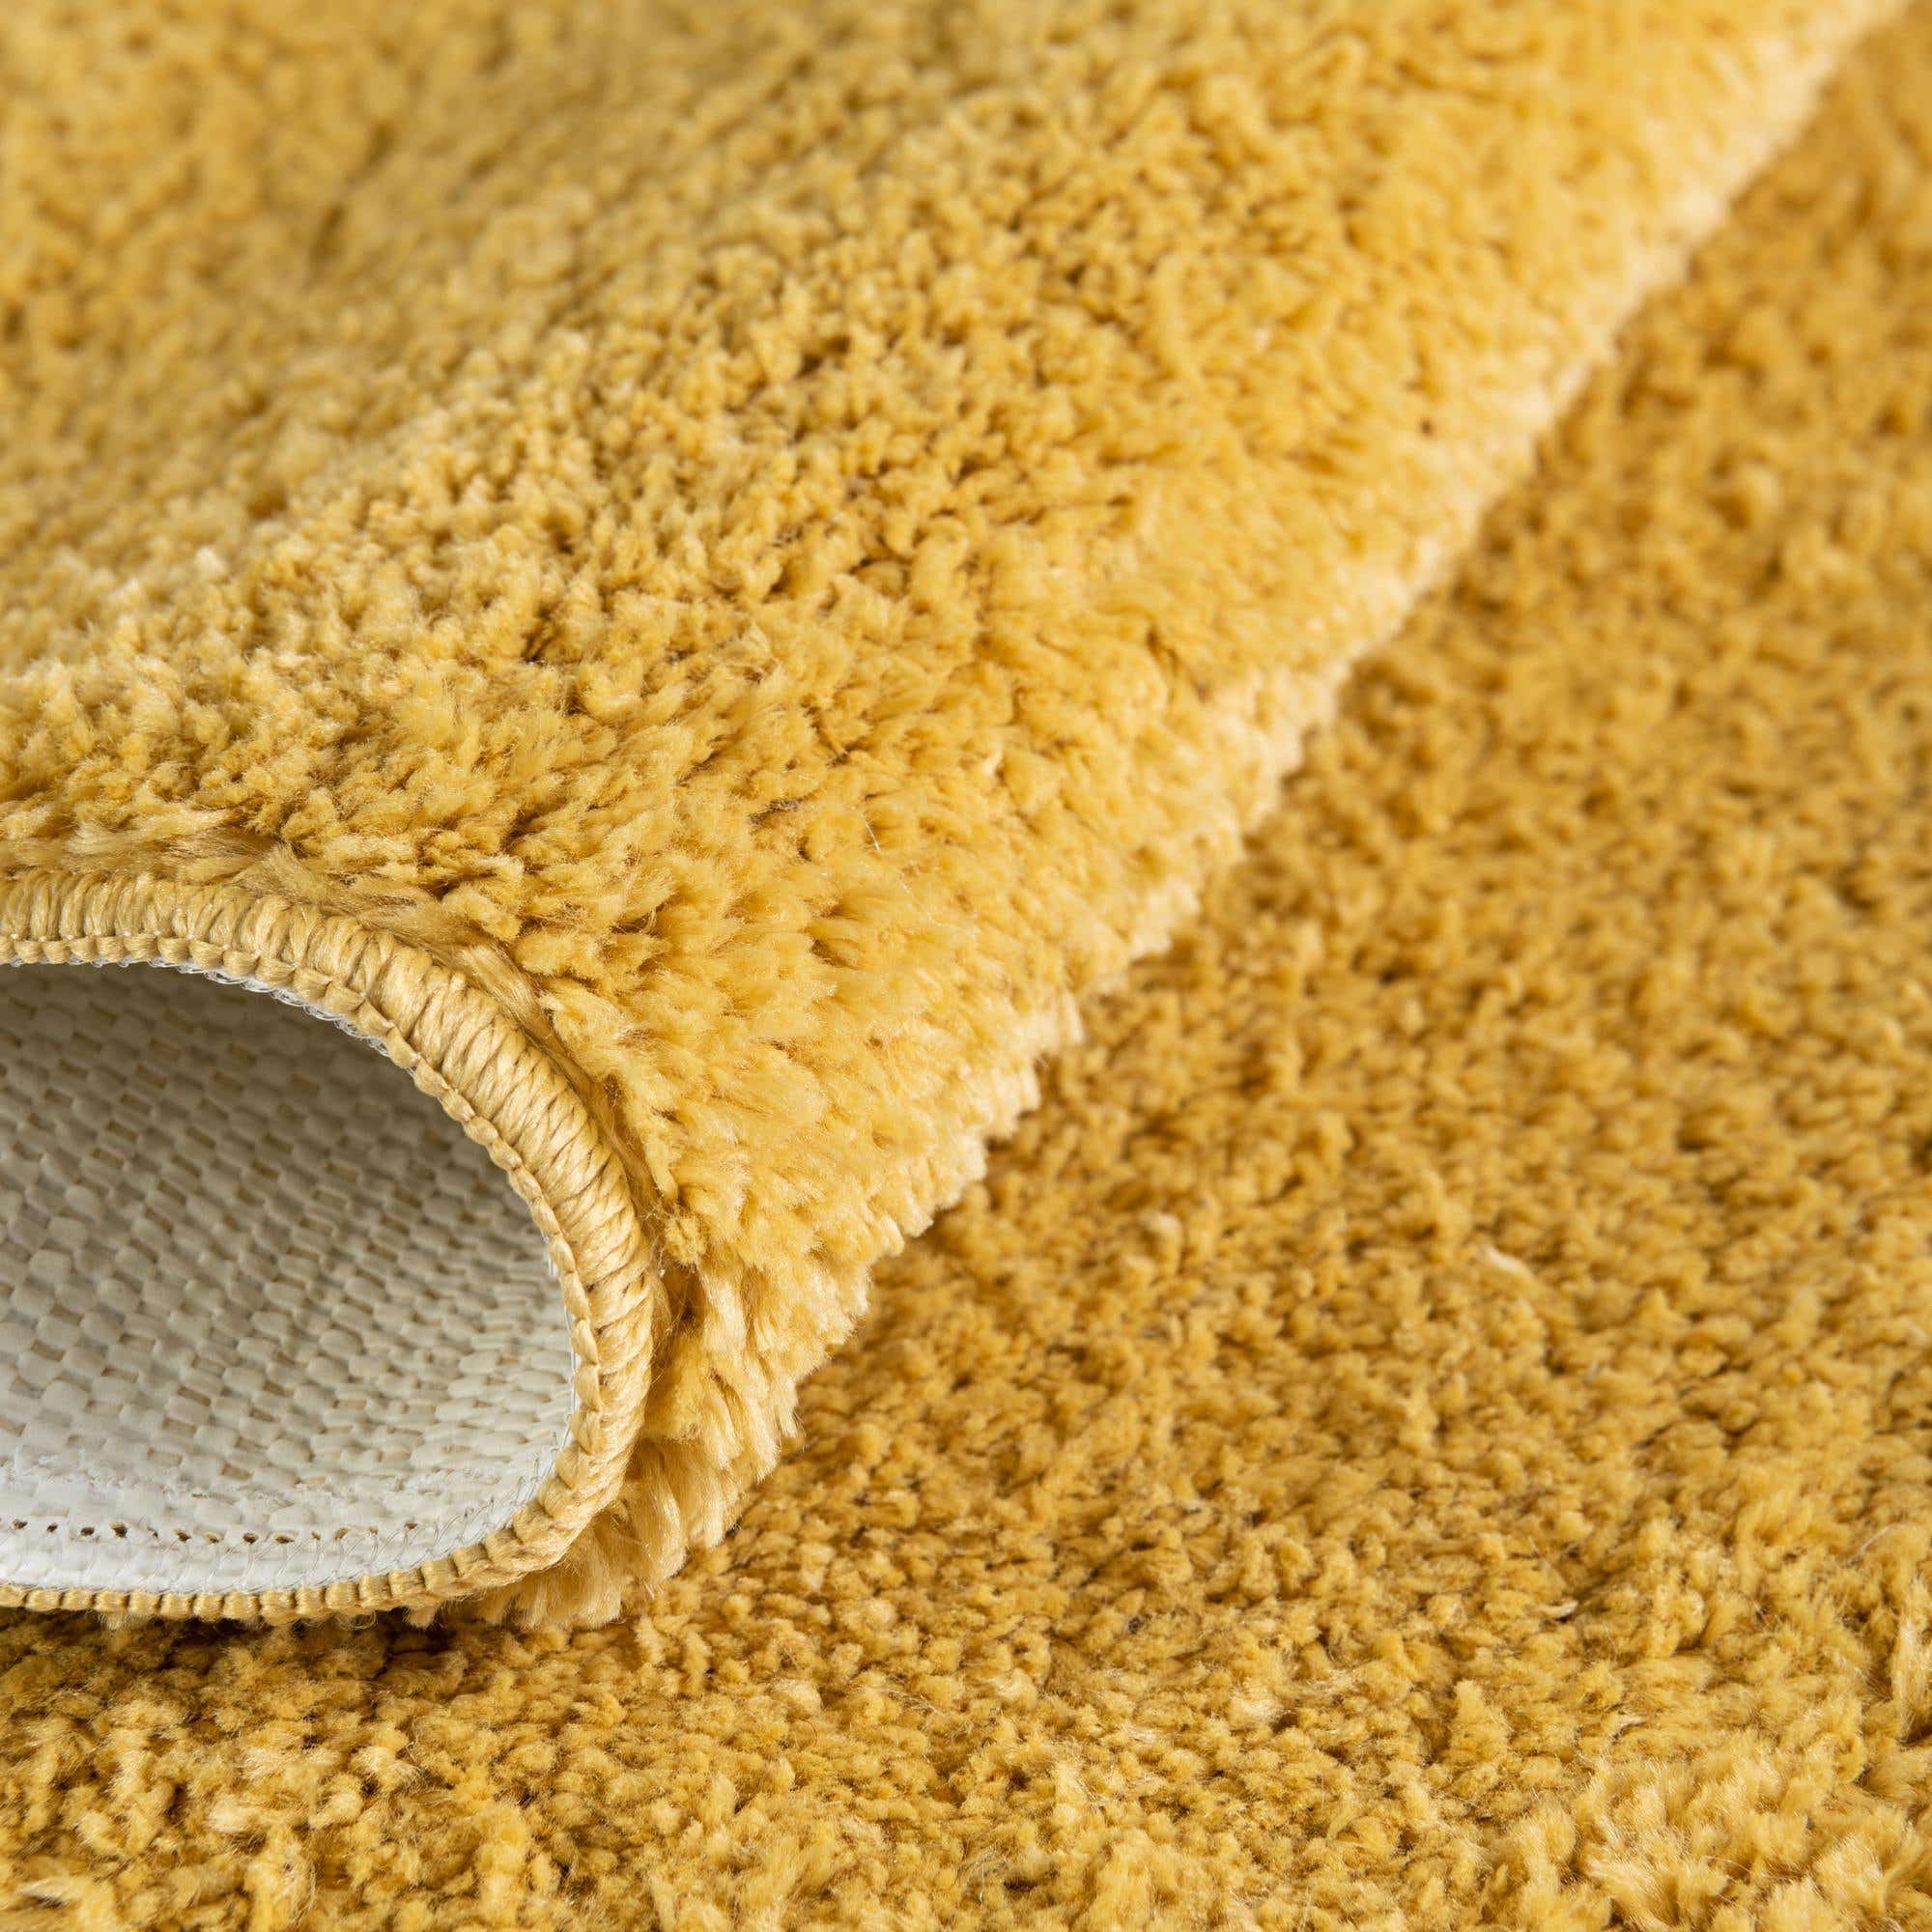 A Bath Mat Will Wake Up Your Space